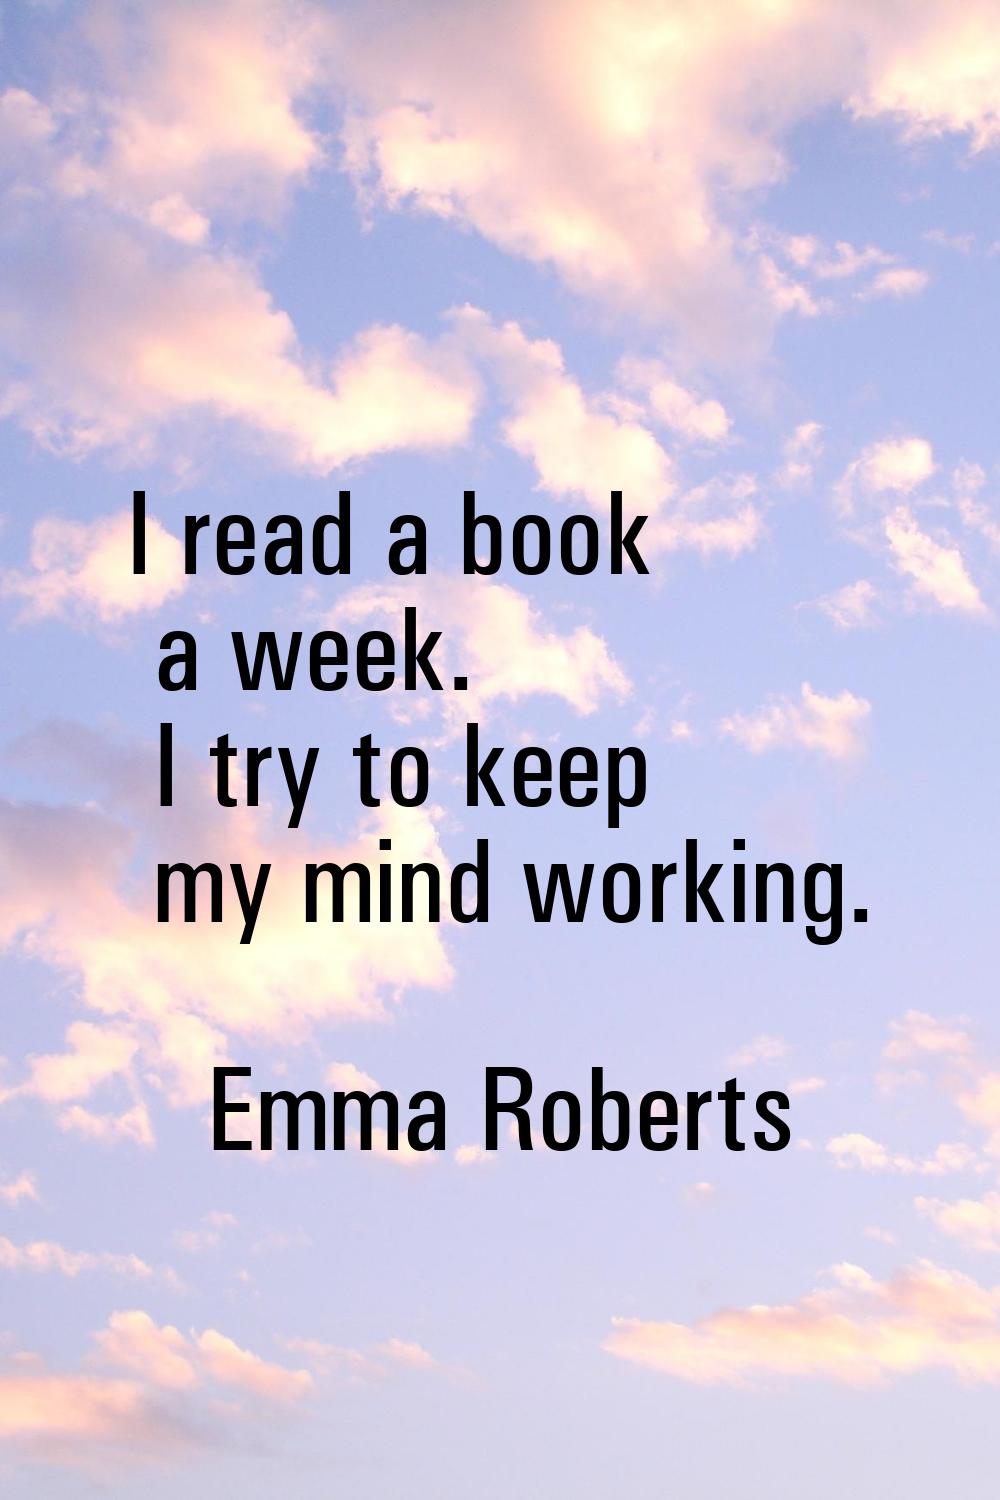 I read a book a week. I try to keep my mind working.